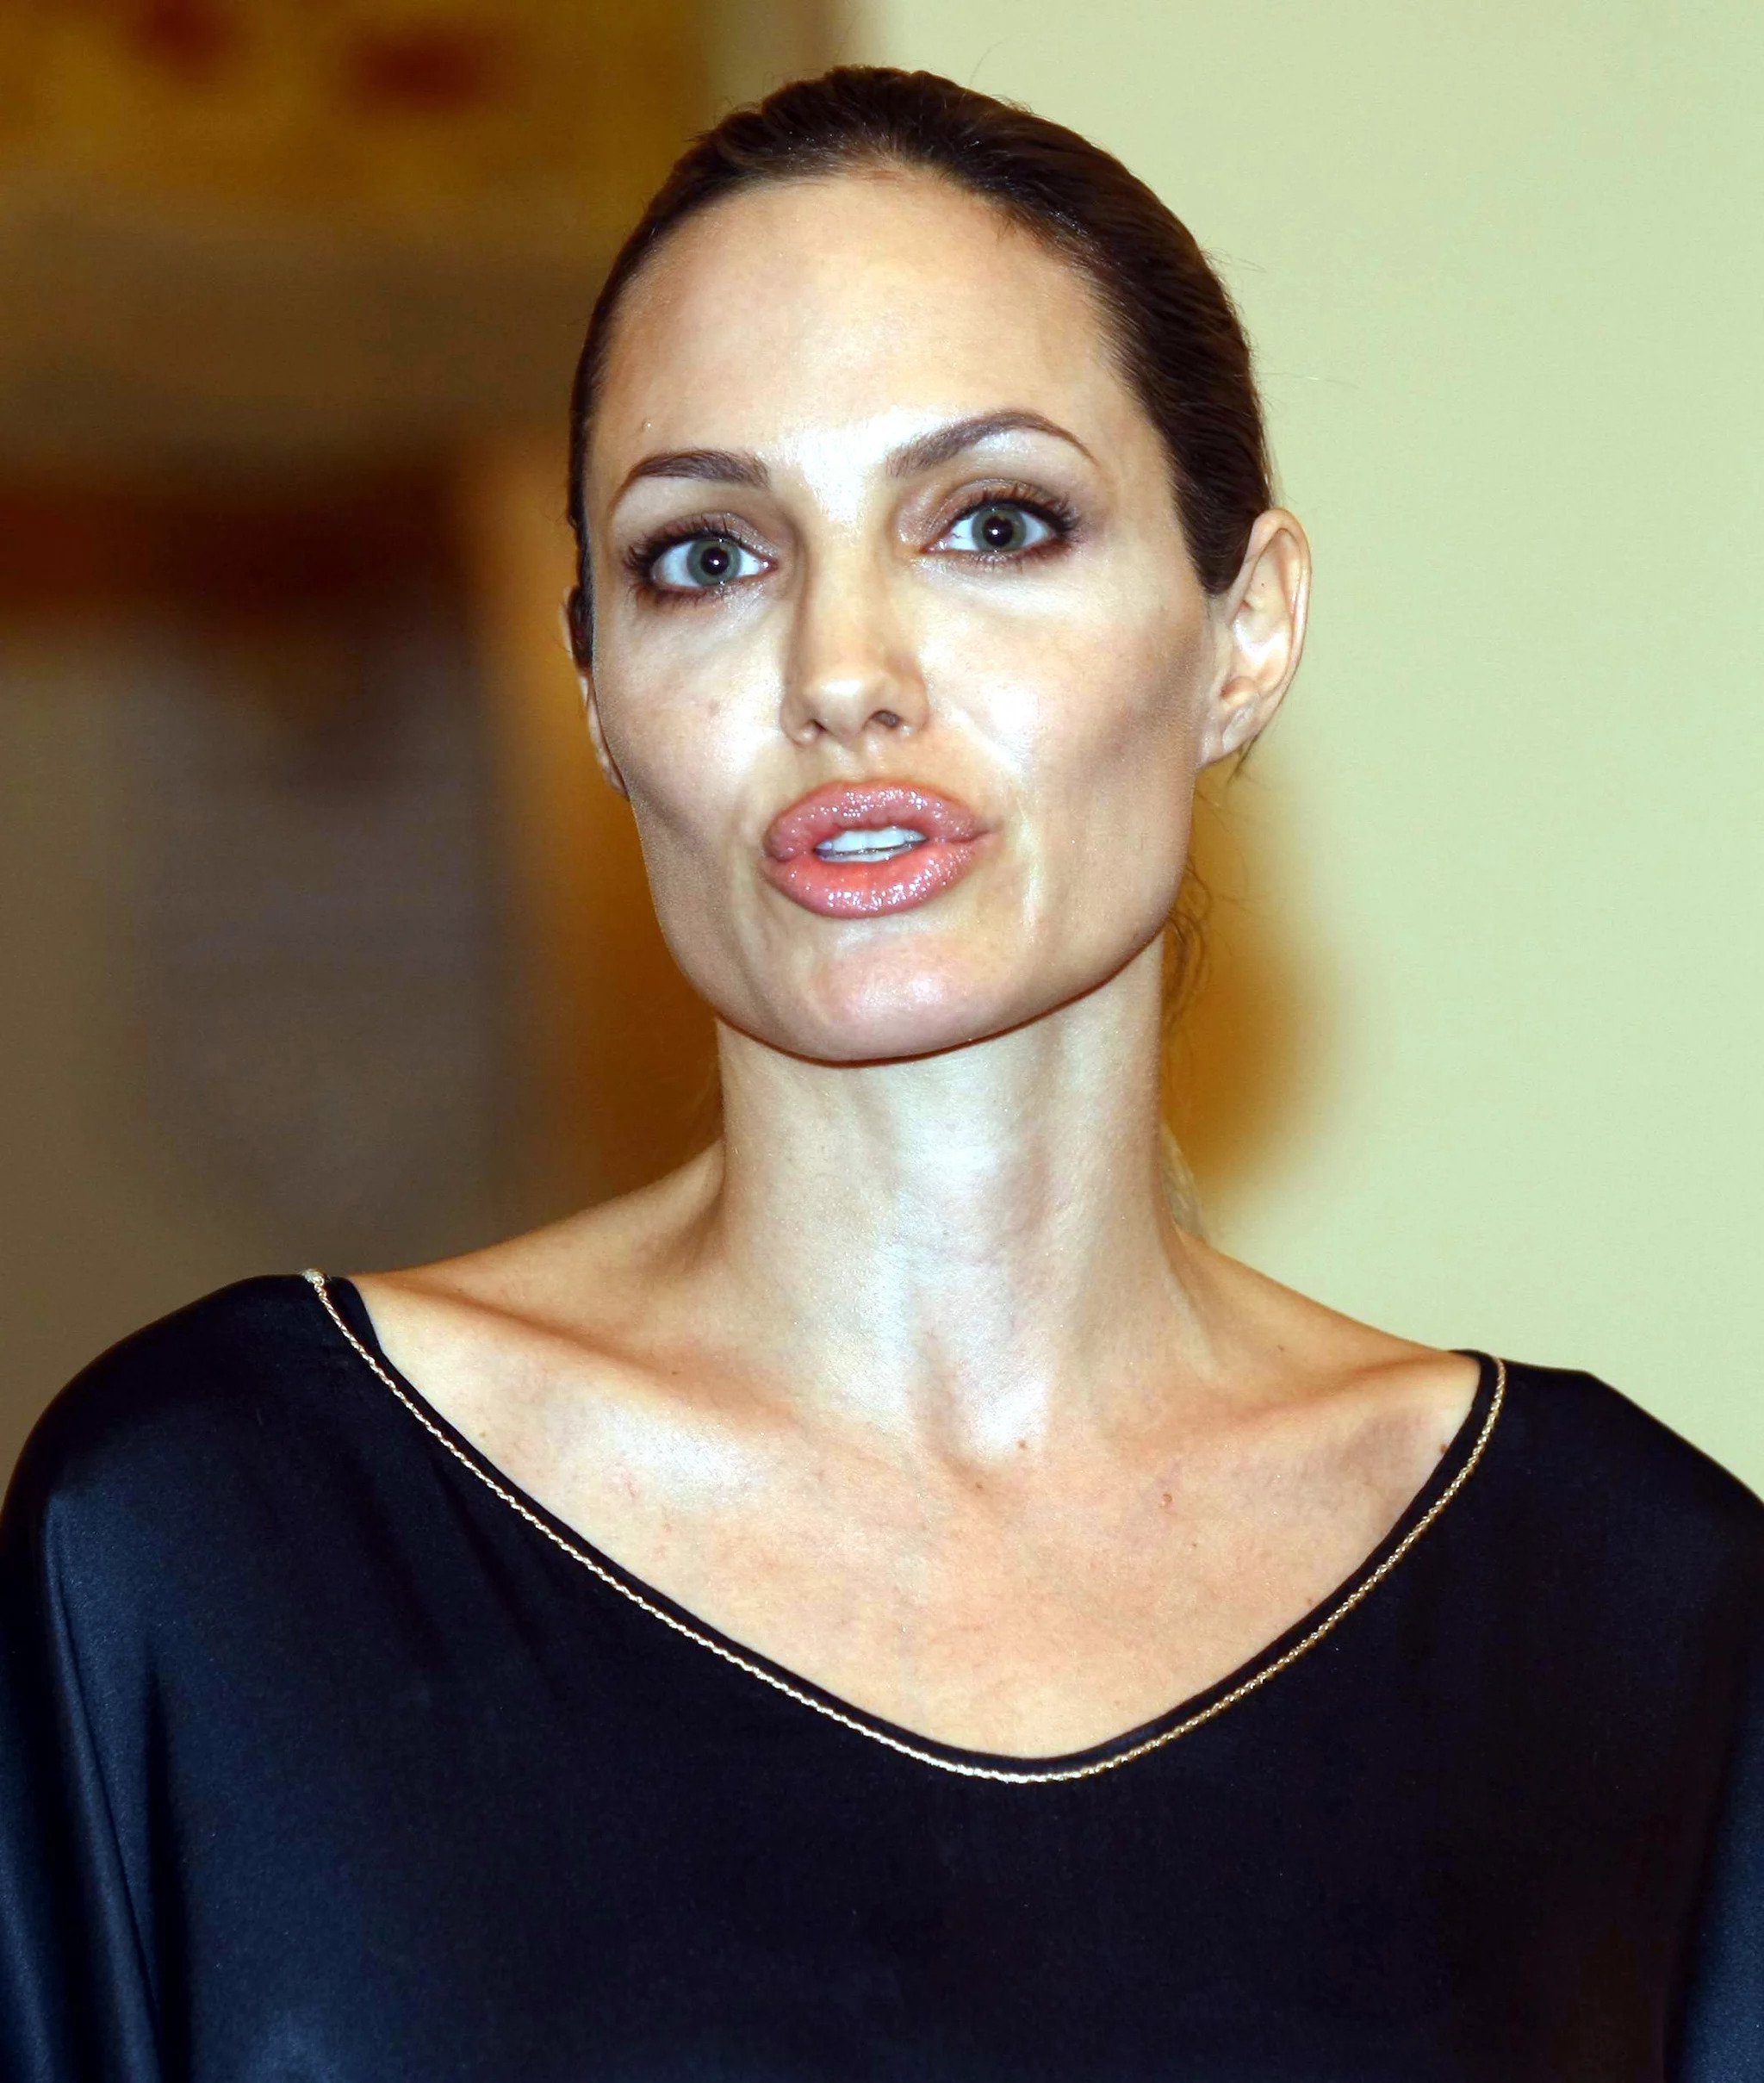 Angelina Jolie wearing a navy-blue dress with her hair tied in the form of a bun